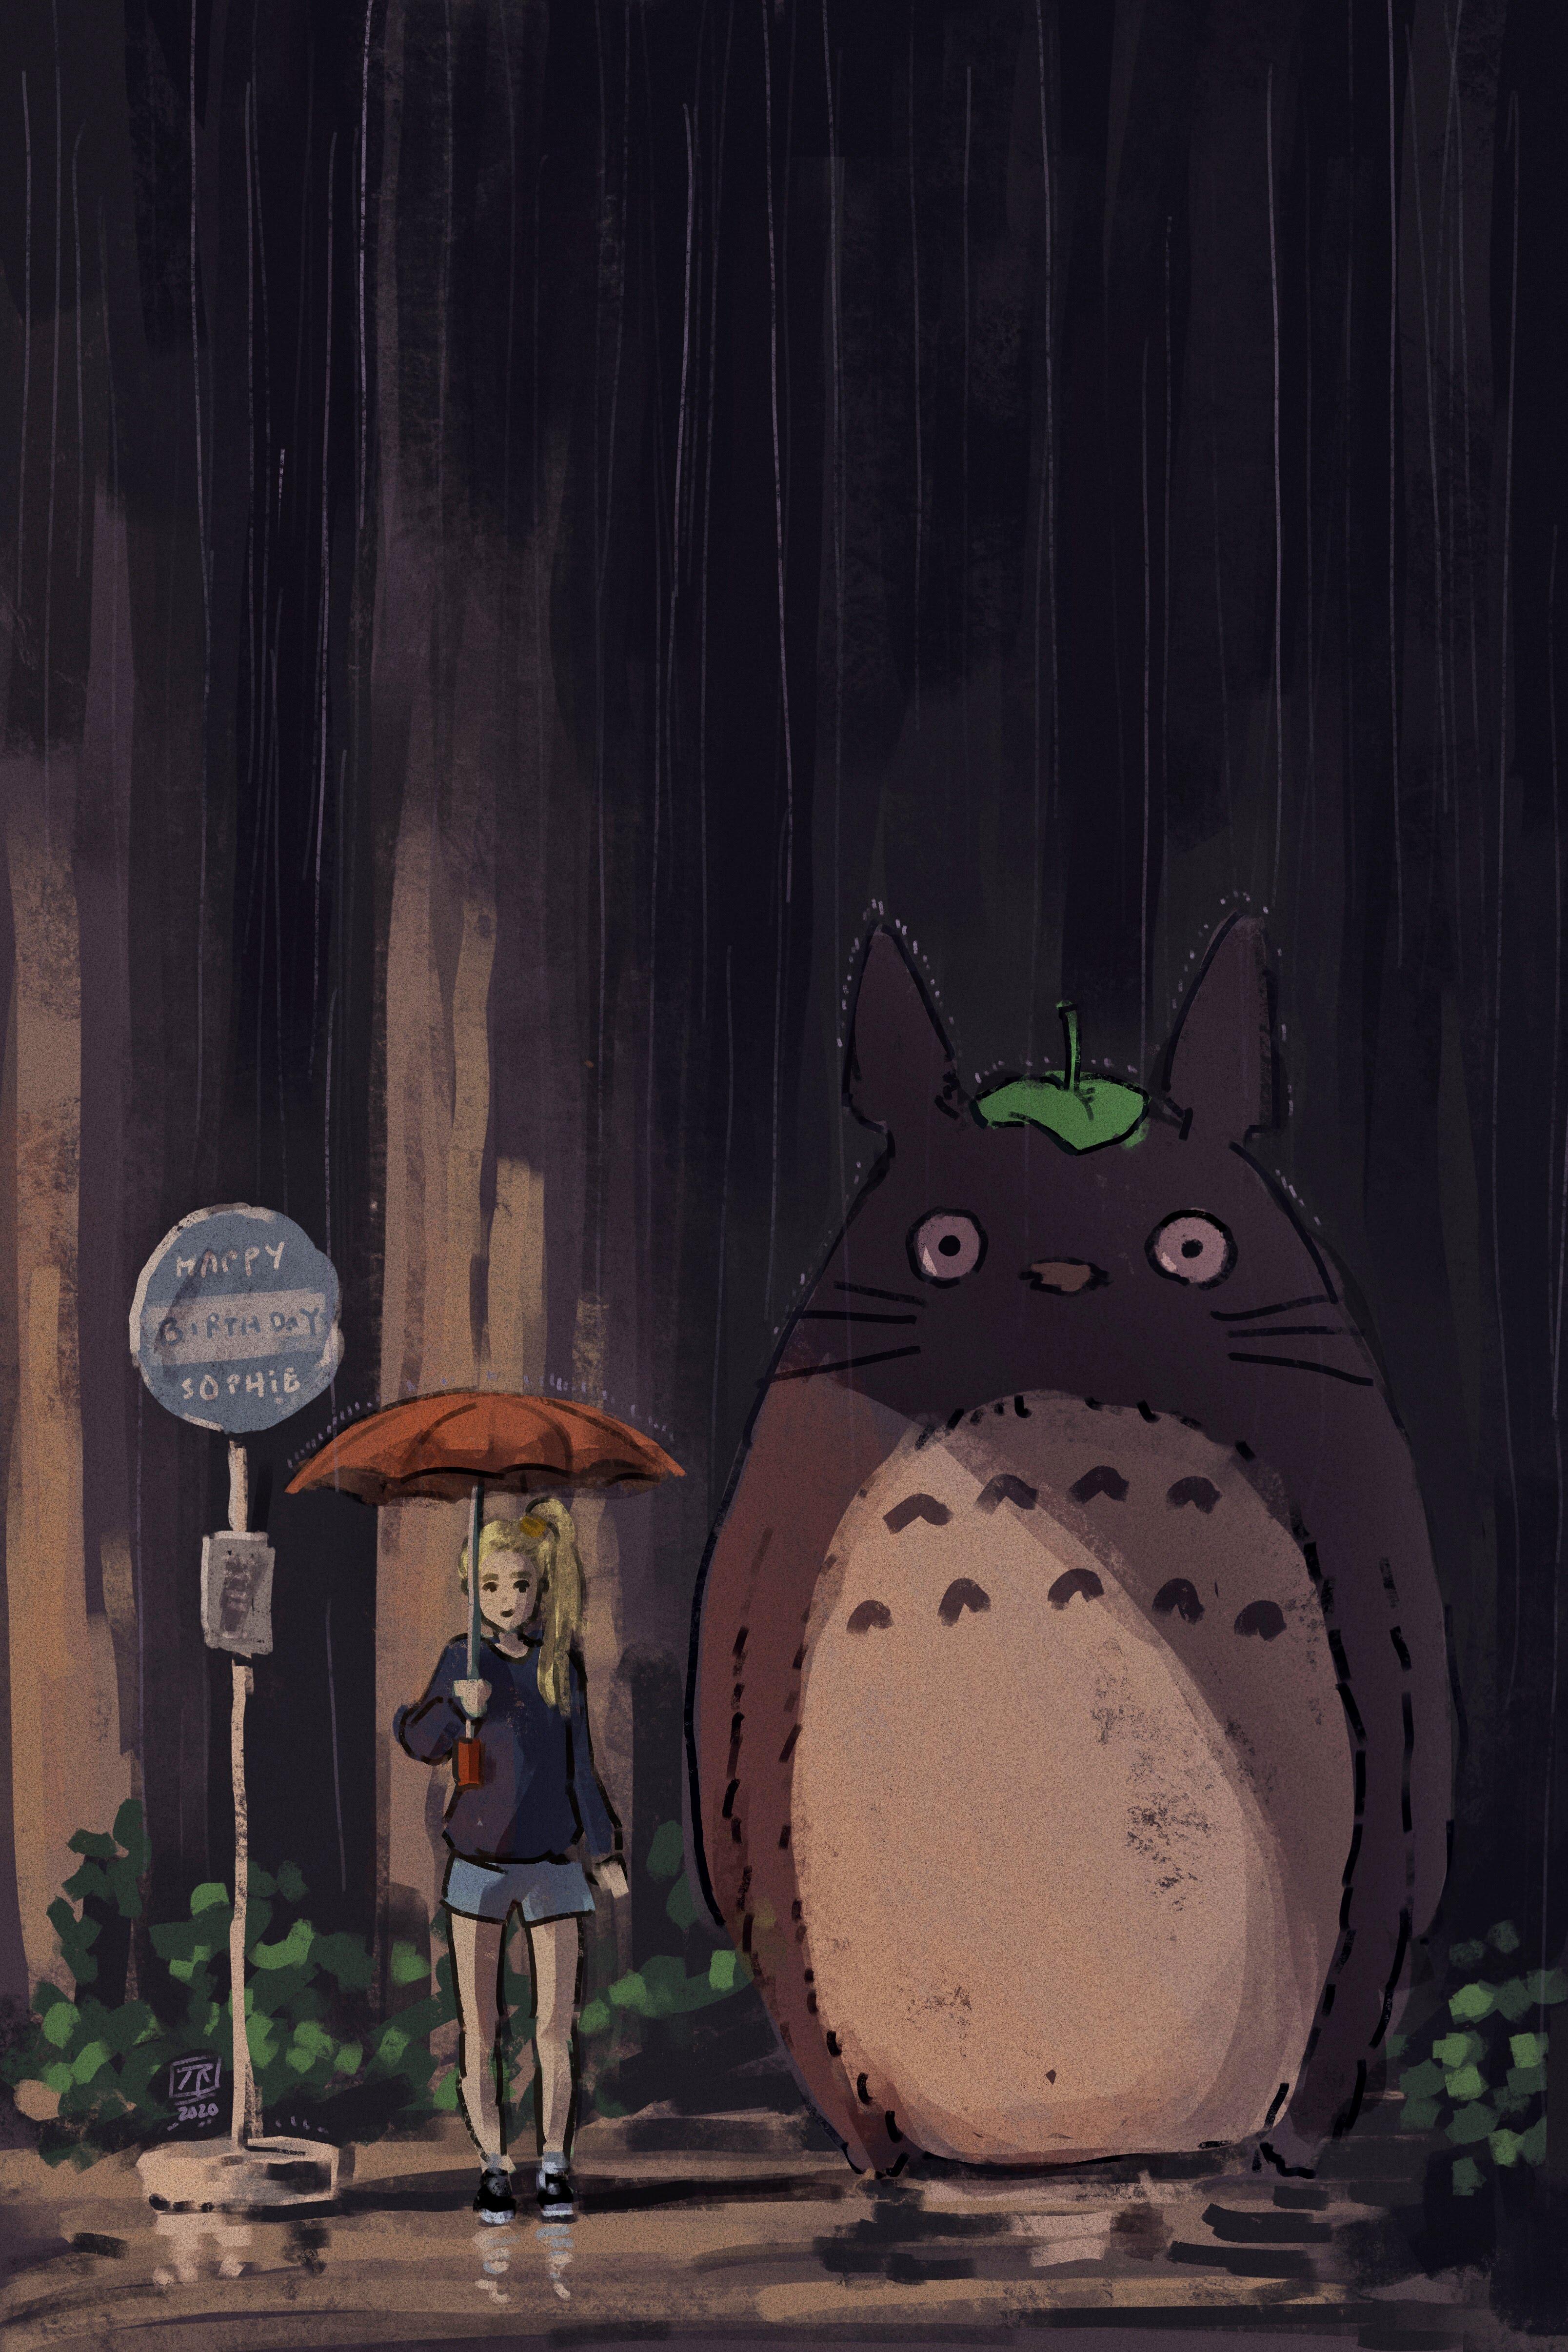 Birthday Totoro painting I made for a friend!